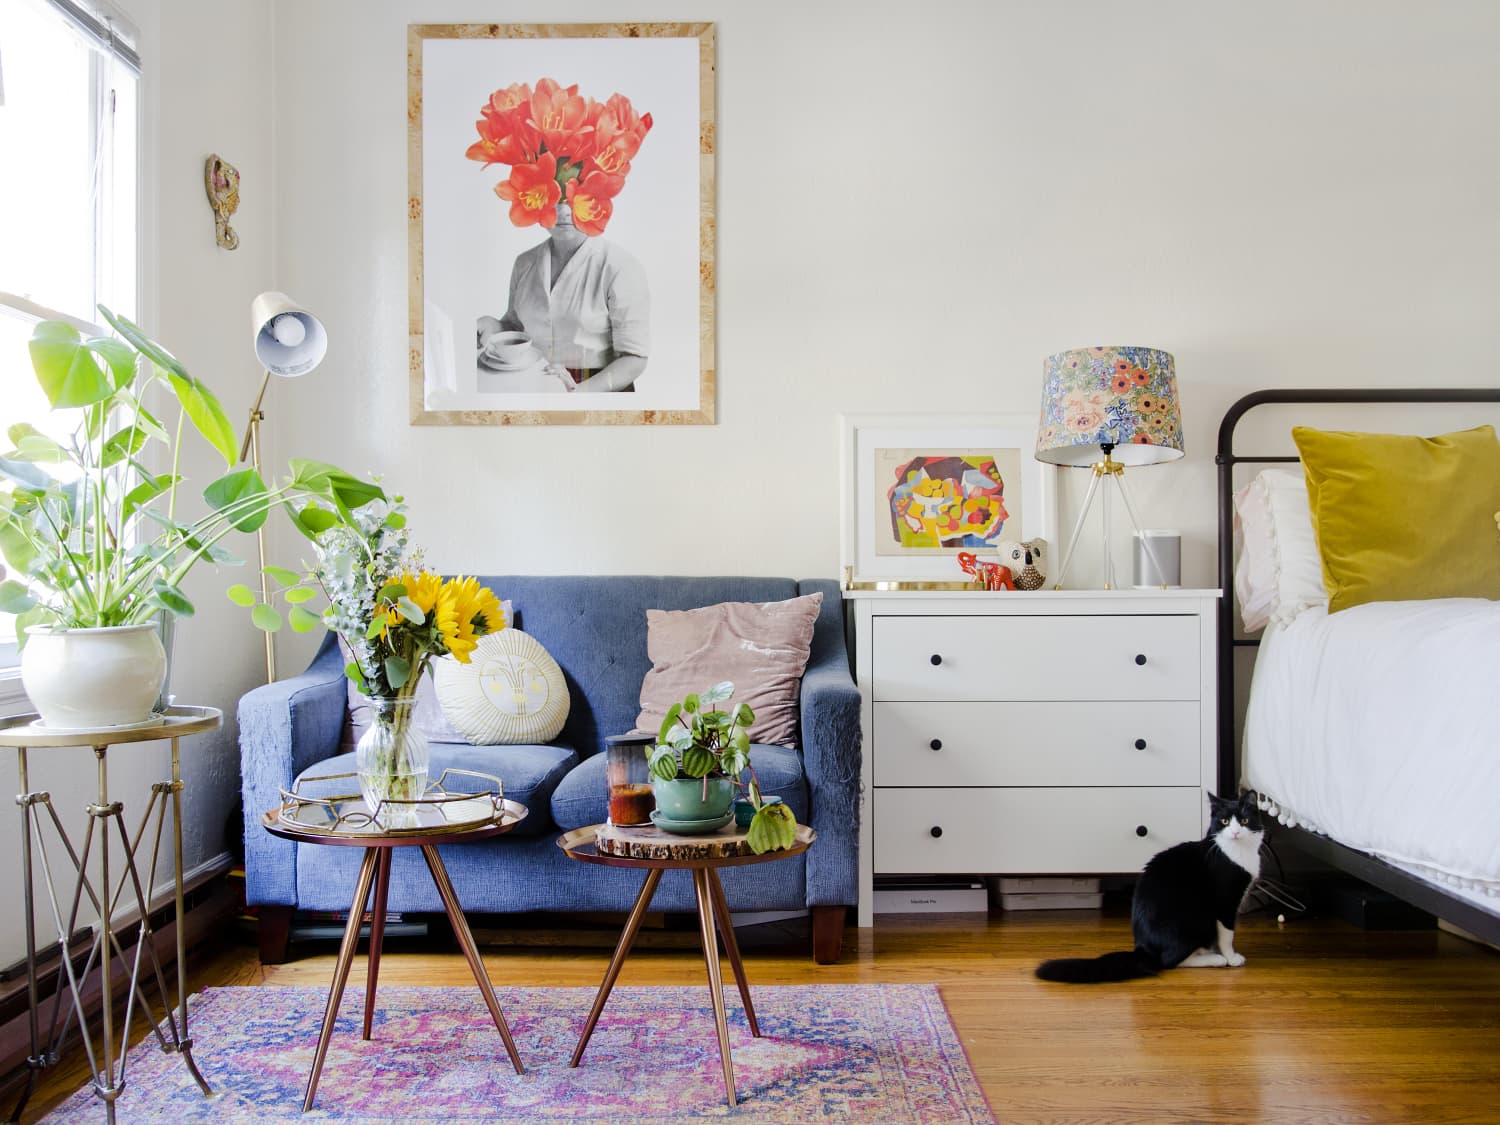 10 Tips for Decorating Small Spaces